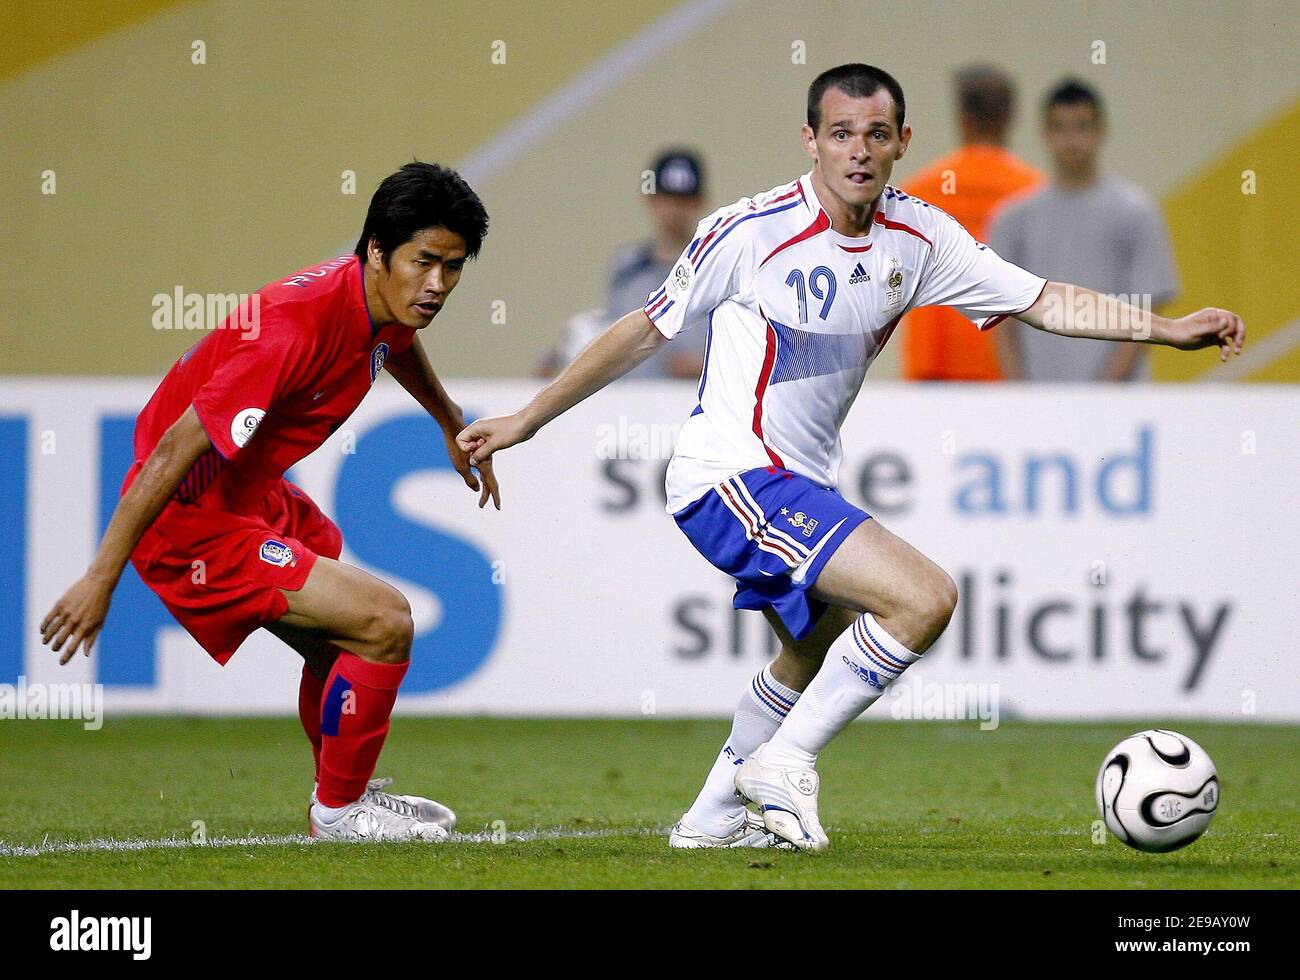 France's Willy Sagnol in action during the World Cup 2006, Group G France vs South Korea, in Leipzig, Germany, on June 18, 2006. The game ended in draw 1-1. Photo by Christian Liewig/ABACAPRESS.COM Stock Photo